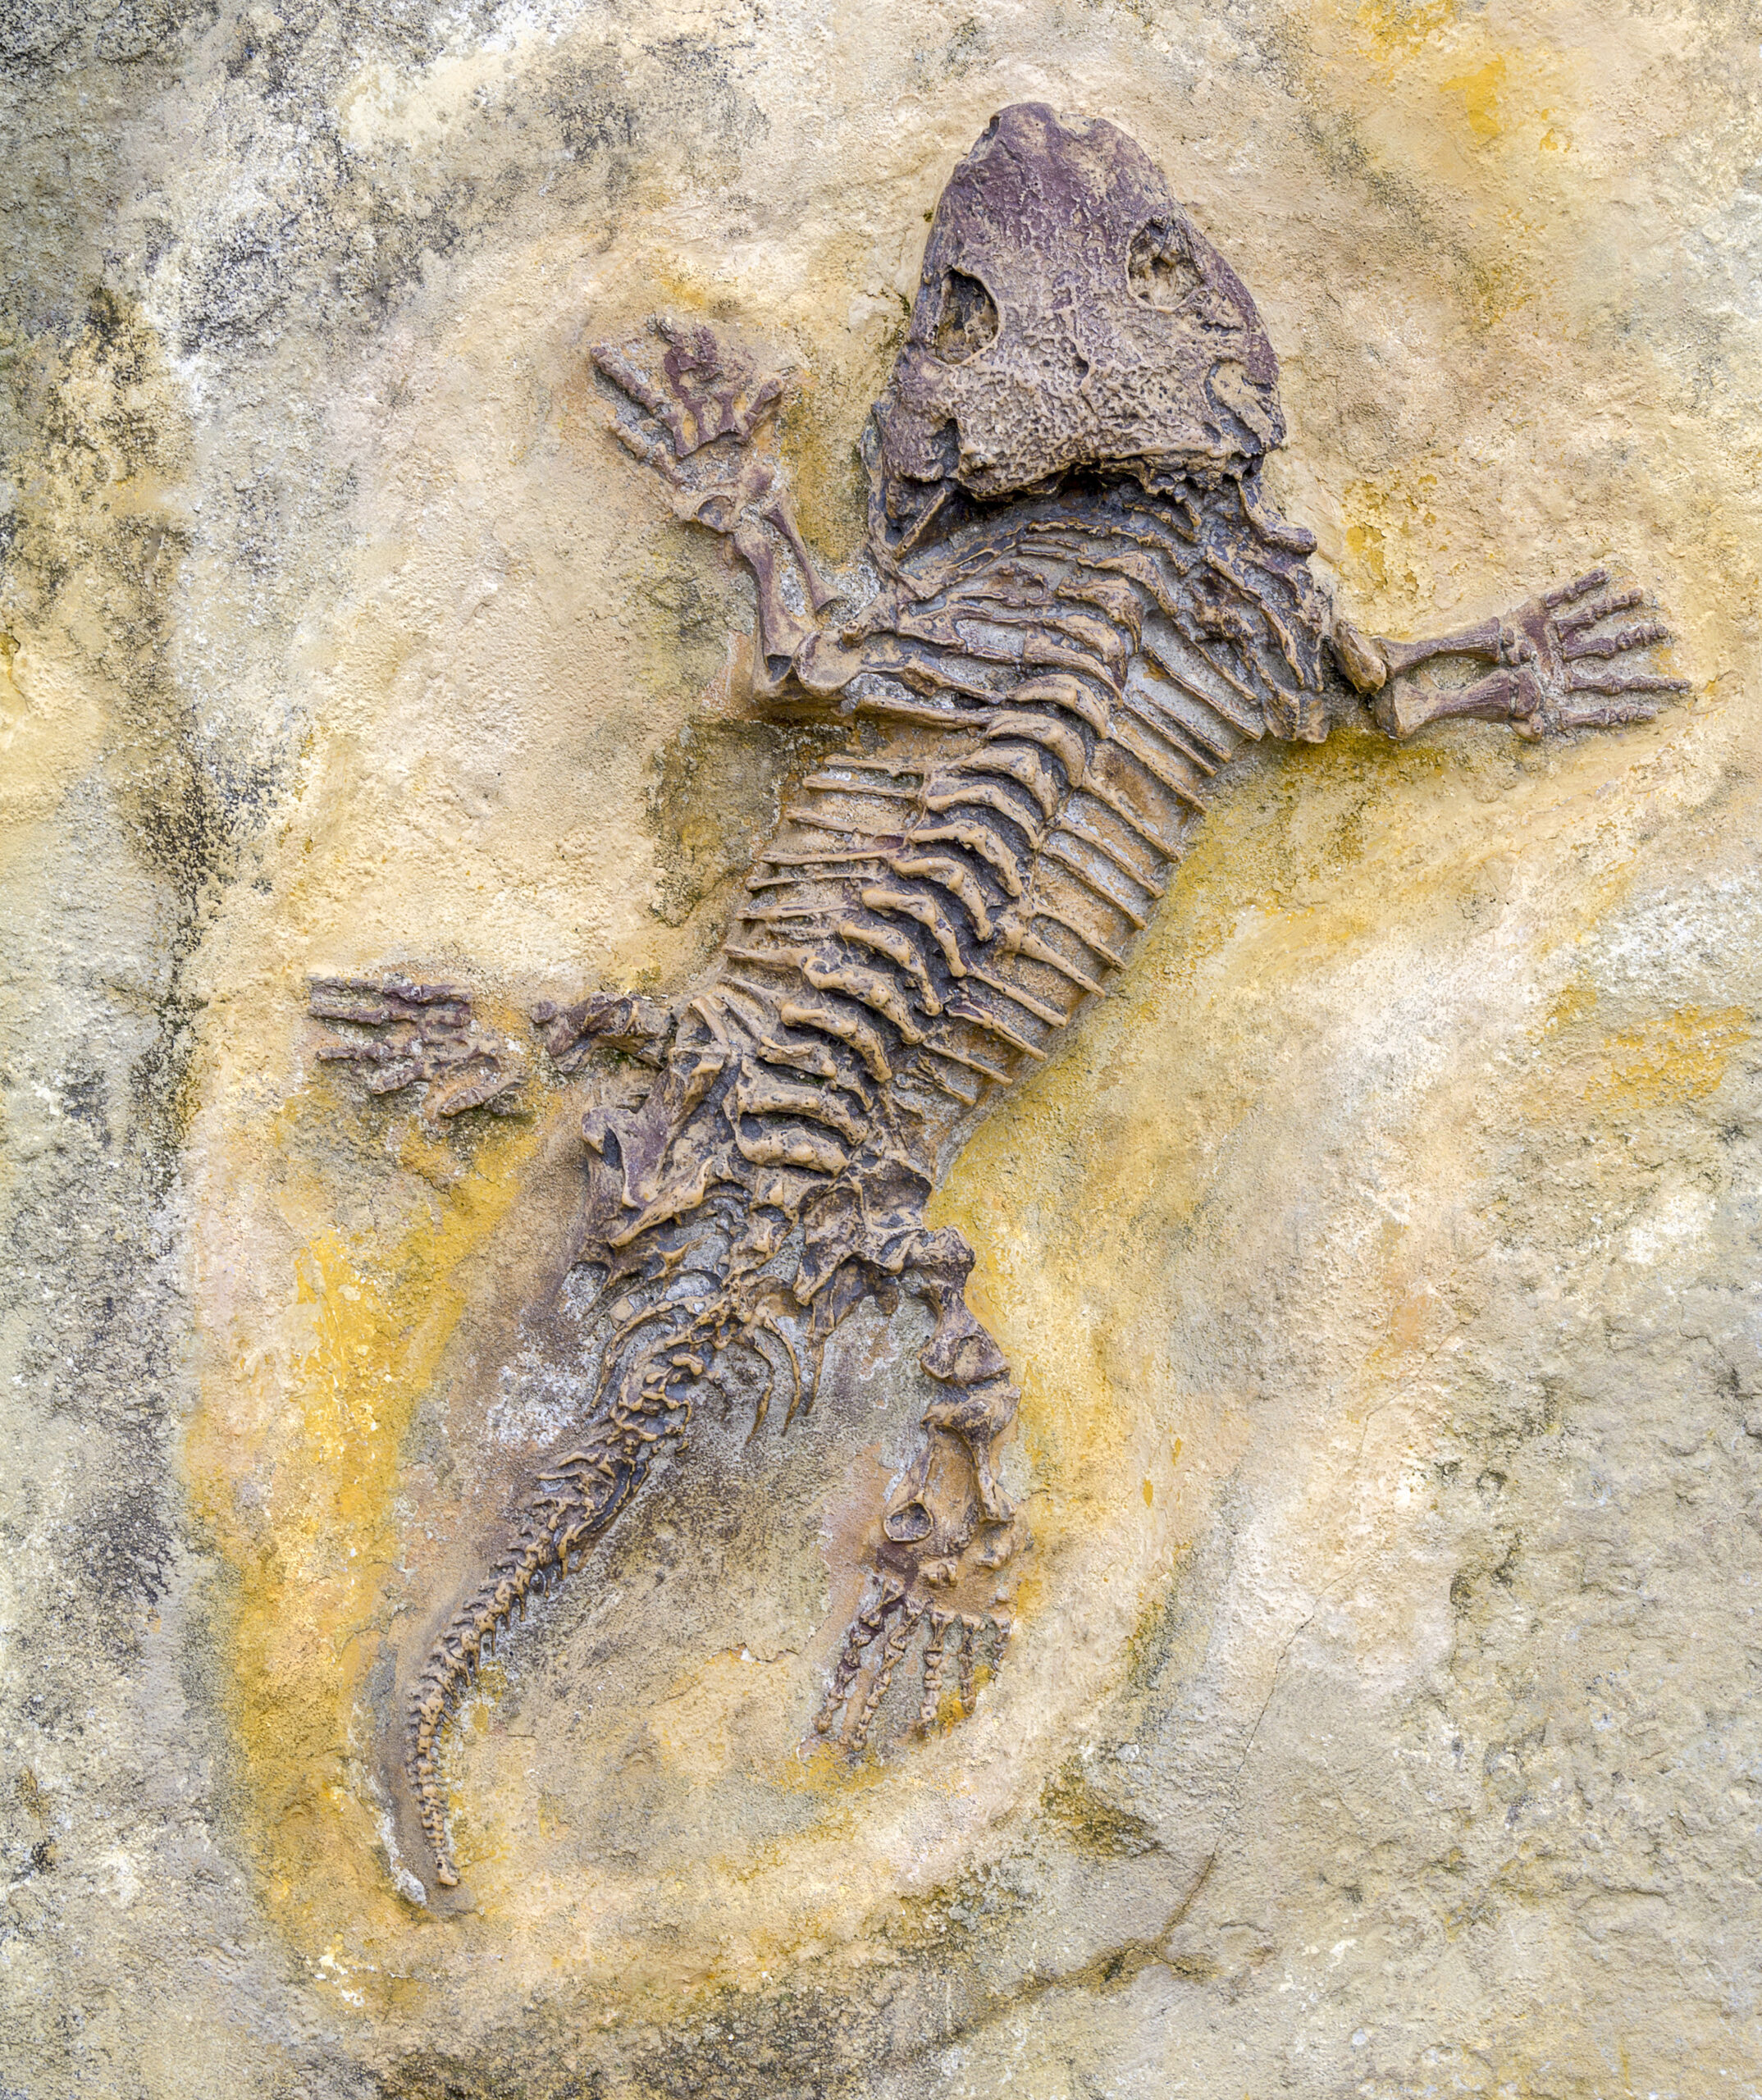 Discovering Fossils from 350 Unique Mammal Species, Spanning 11.5 Million Years – amazingsportsusa.com